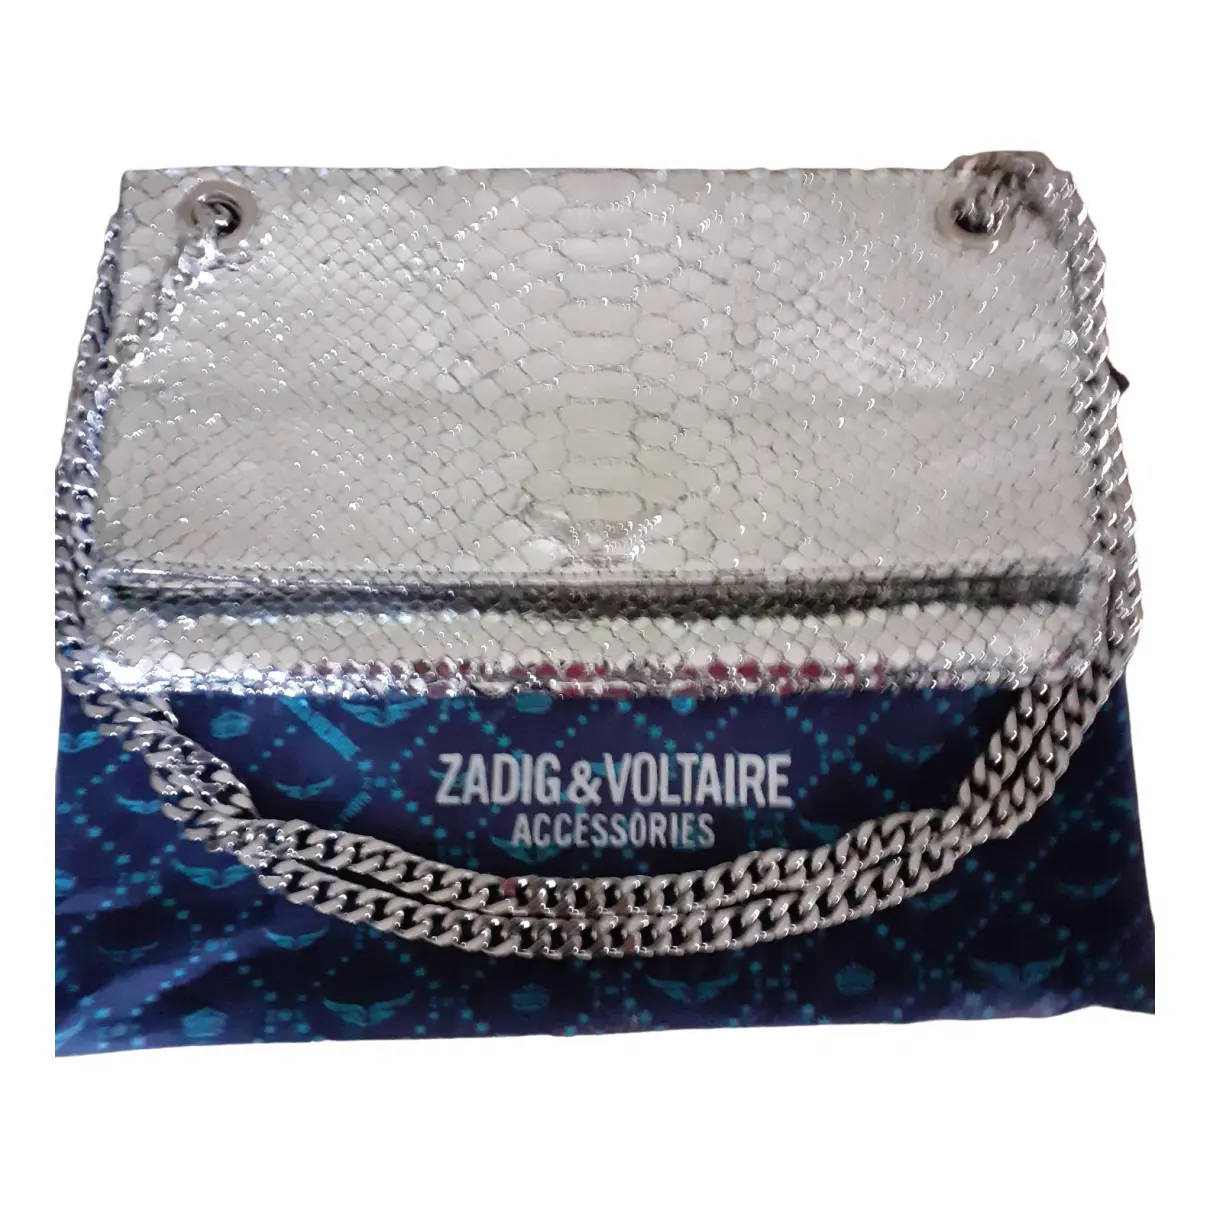 Rock patent leather clutch bag Zadig & Voltaire